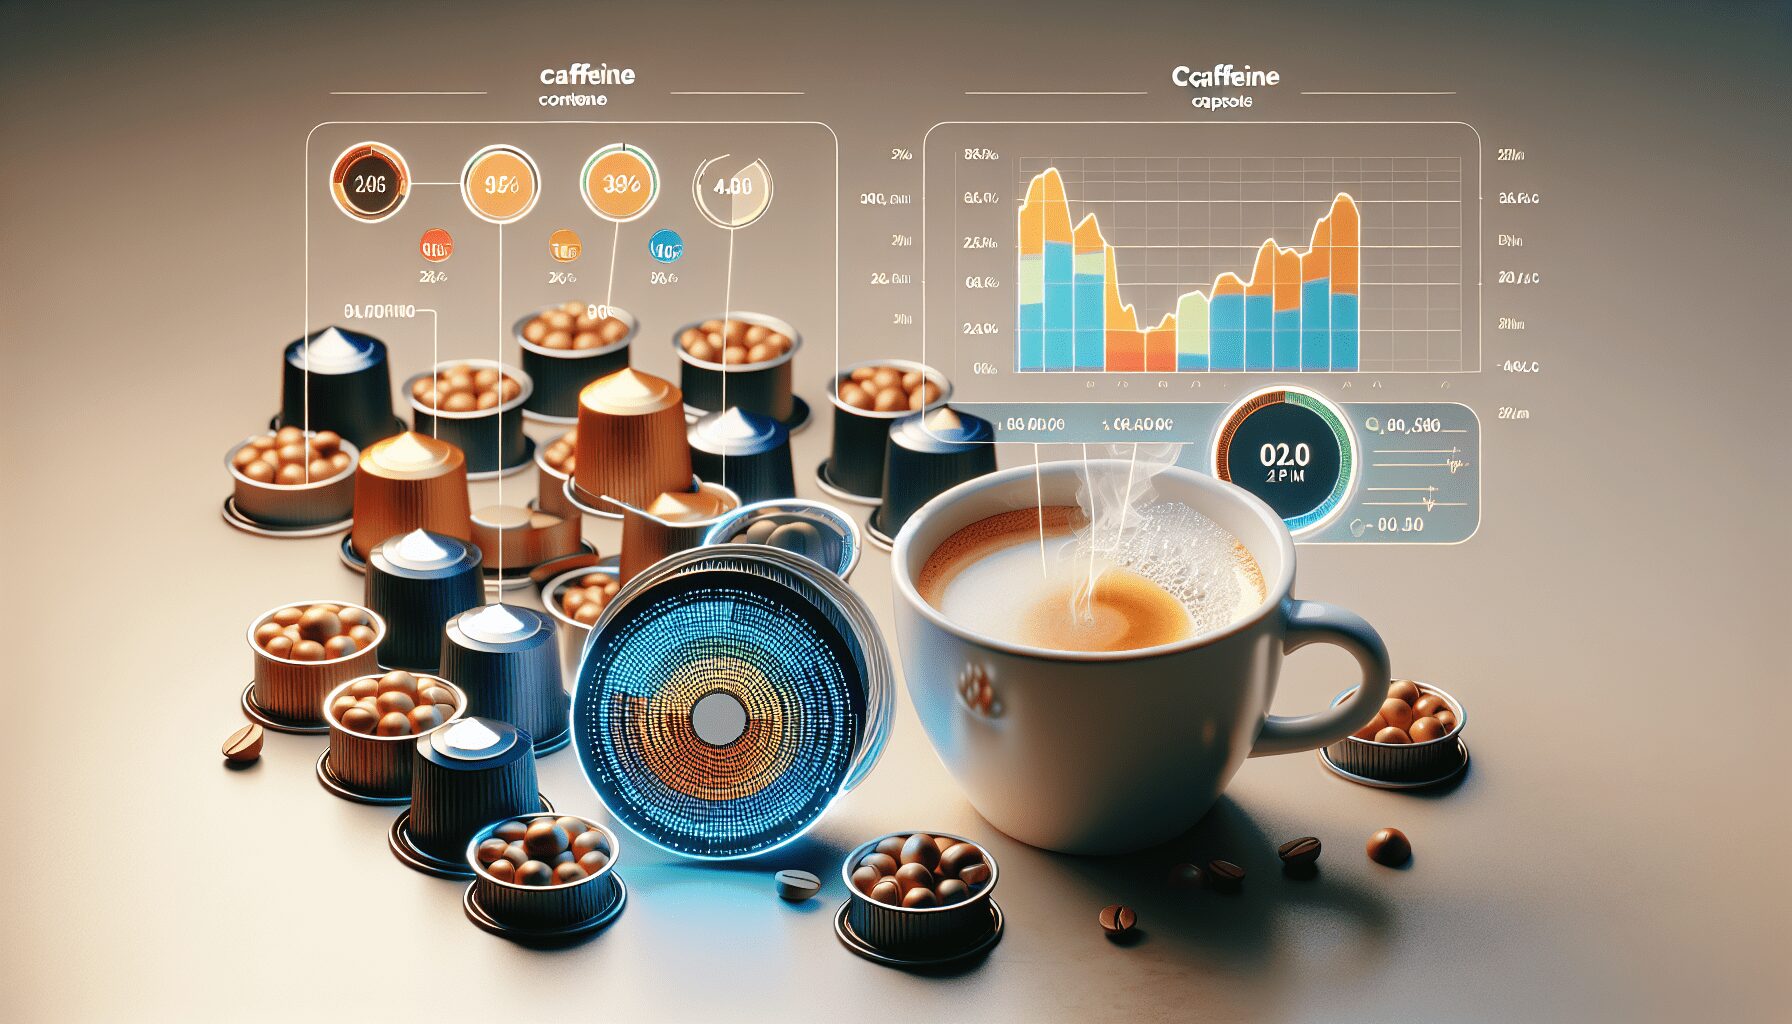 How Much Caffeine Does Nespresso Have?